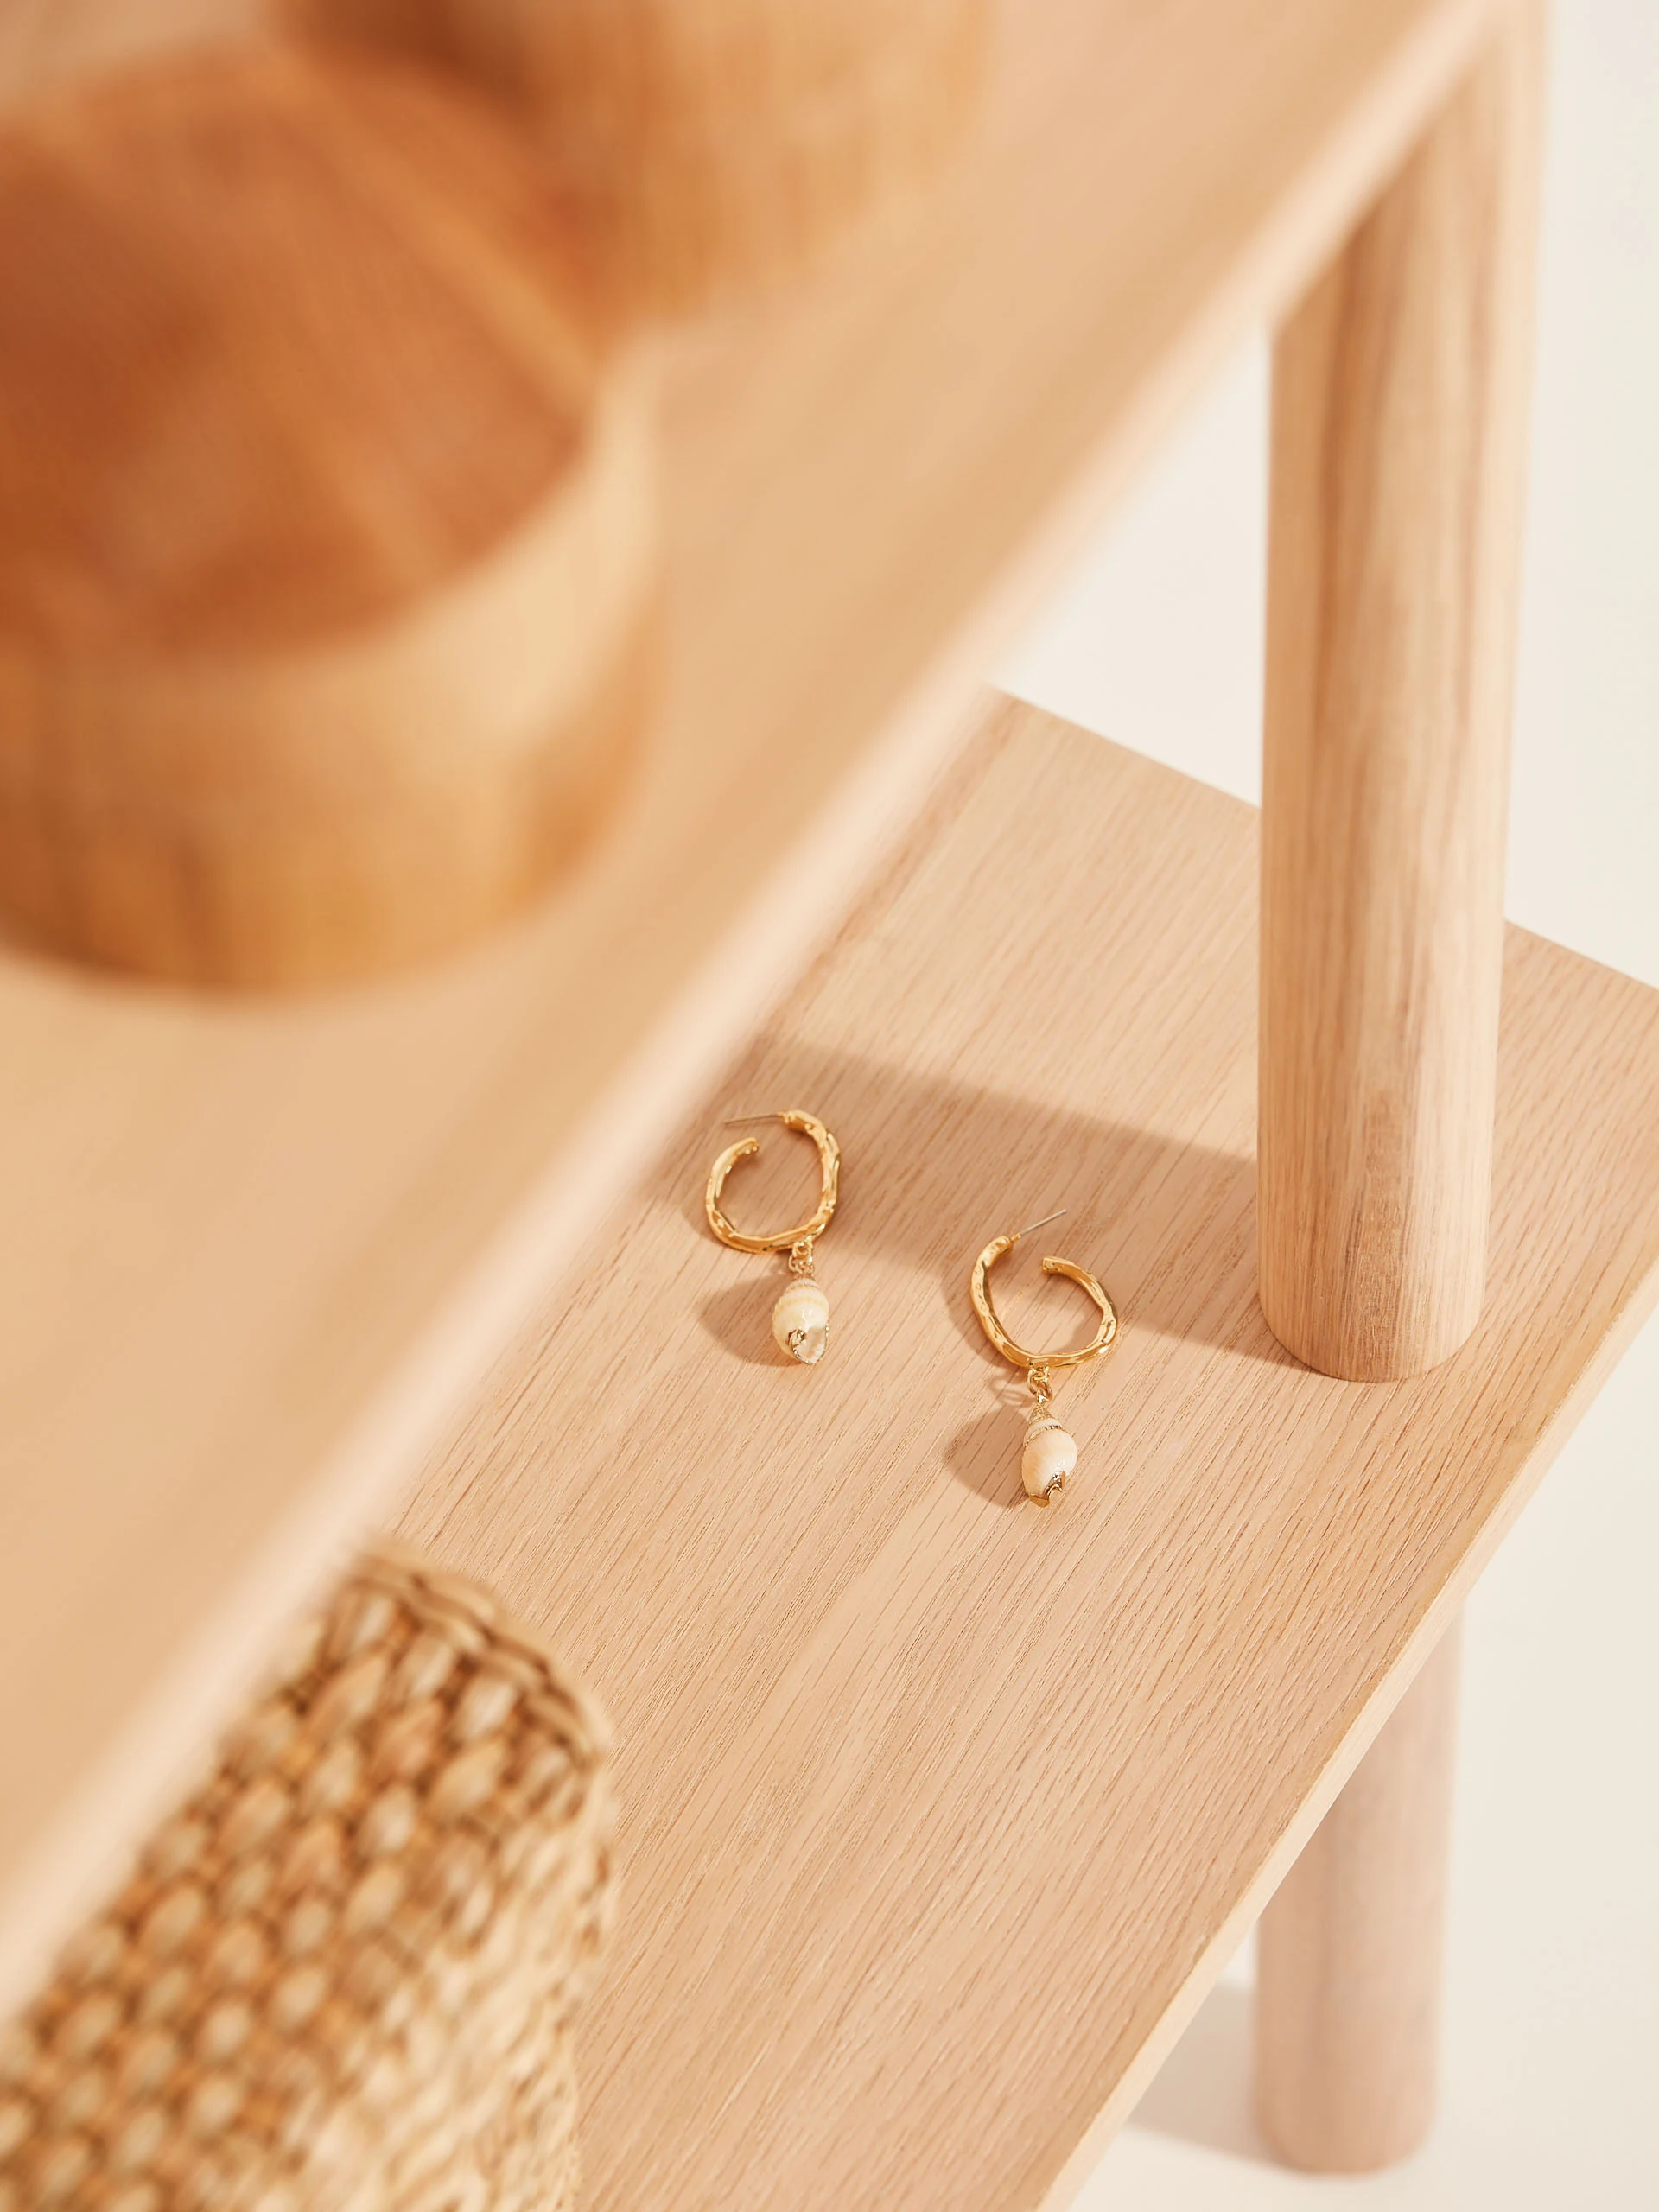 GOLD-PLATED EARRINGS